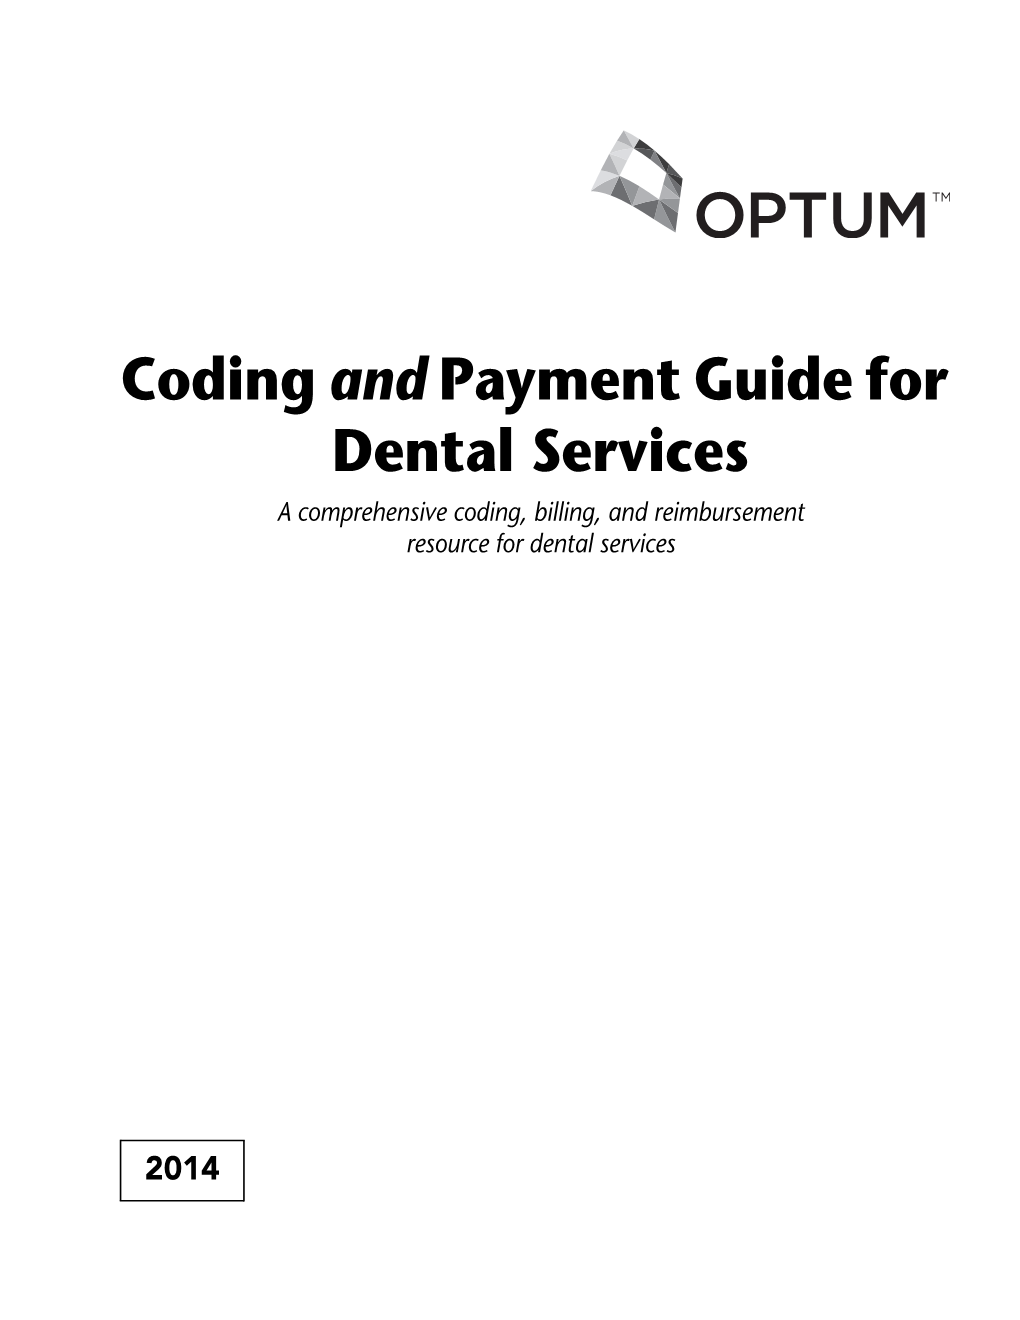 Coding and Payment Guide for Dental Services a Comprehensive Coding, Billing, and Reimbursement Resource for Dental Services